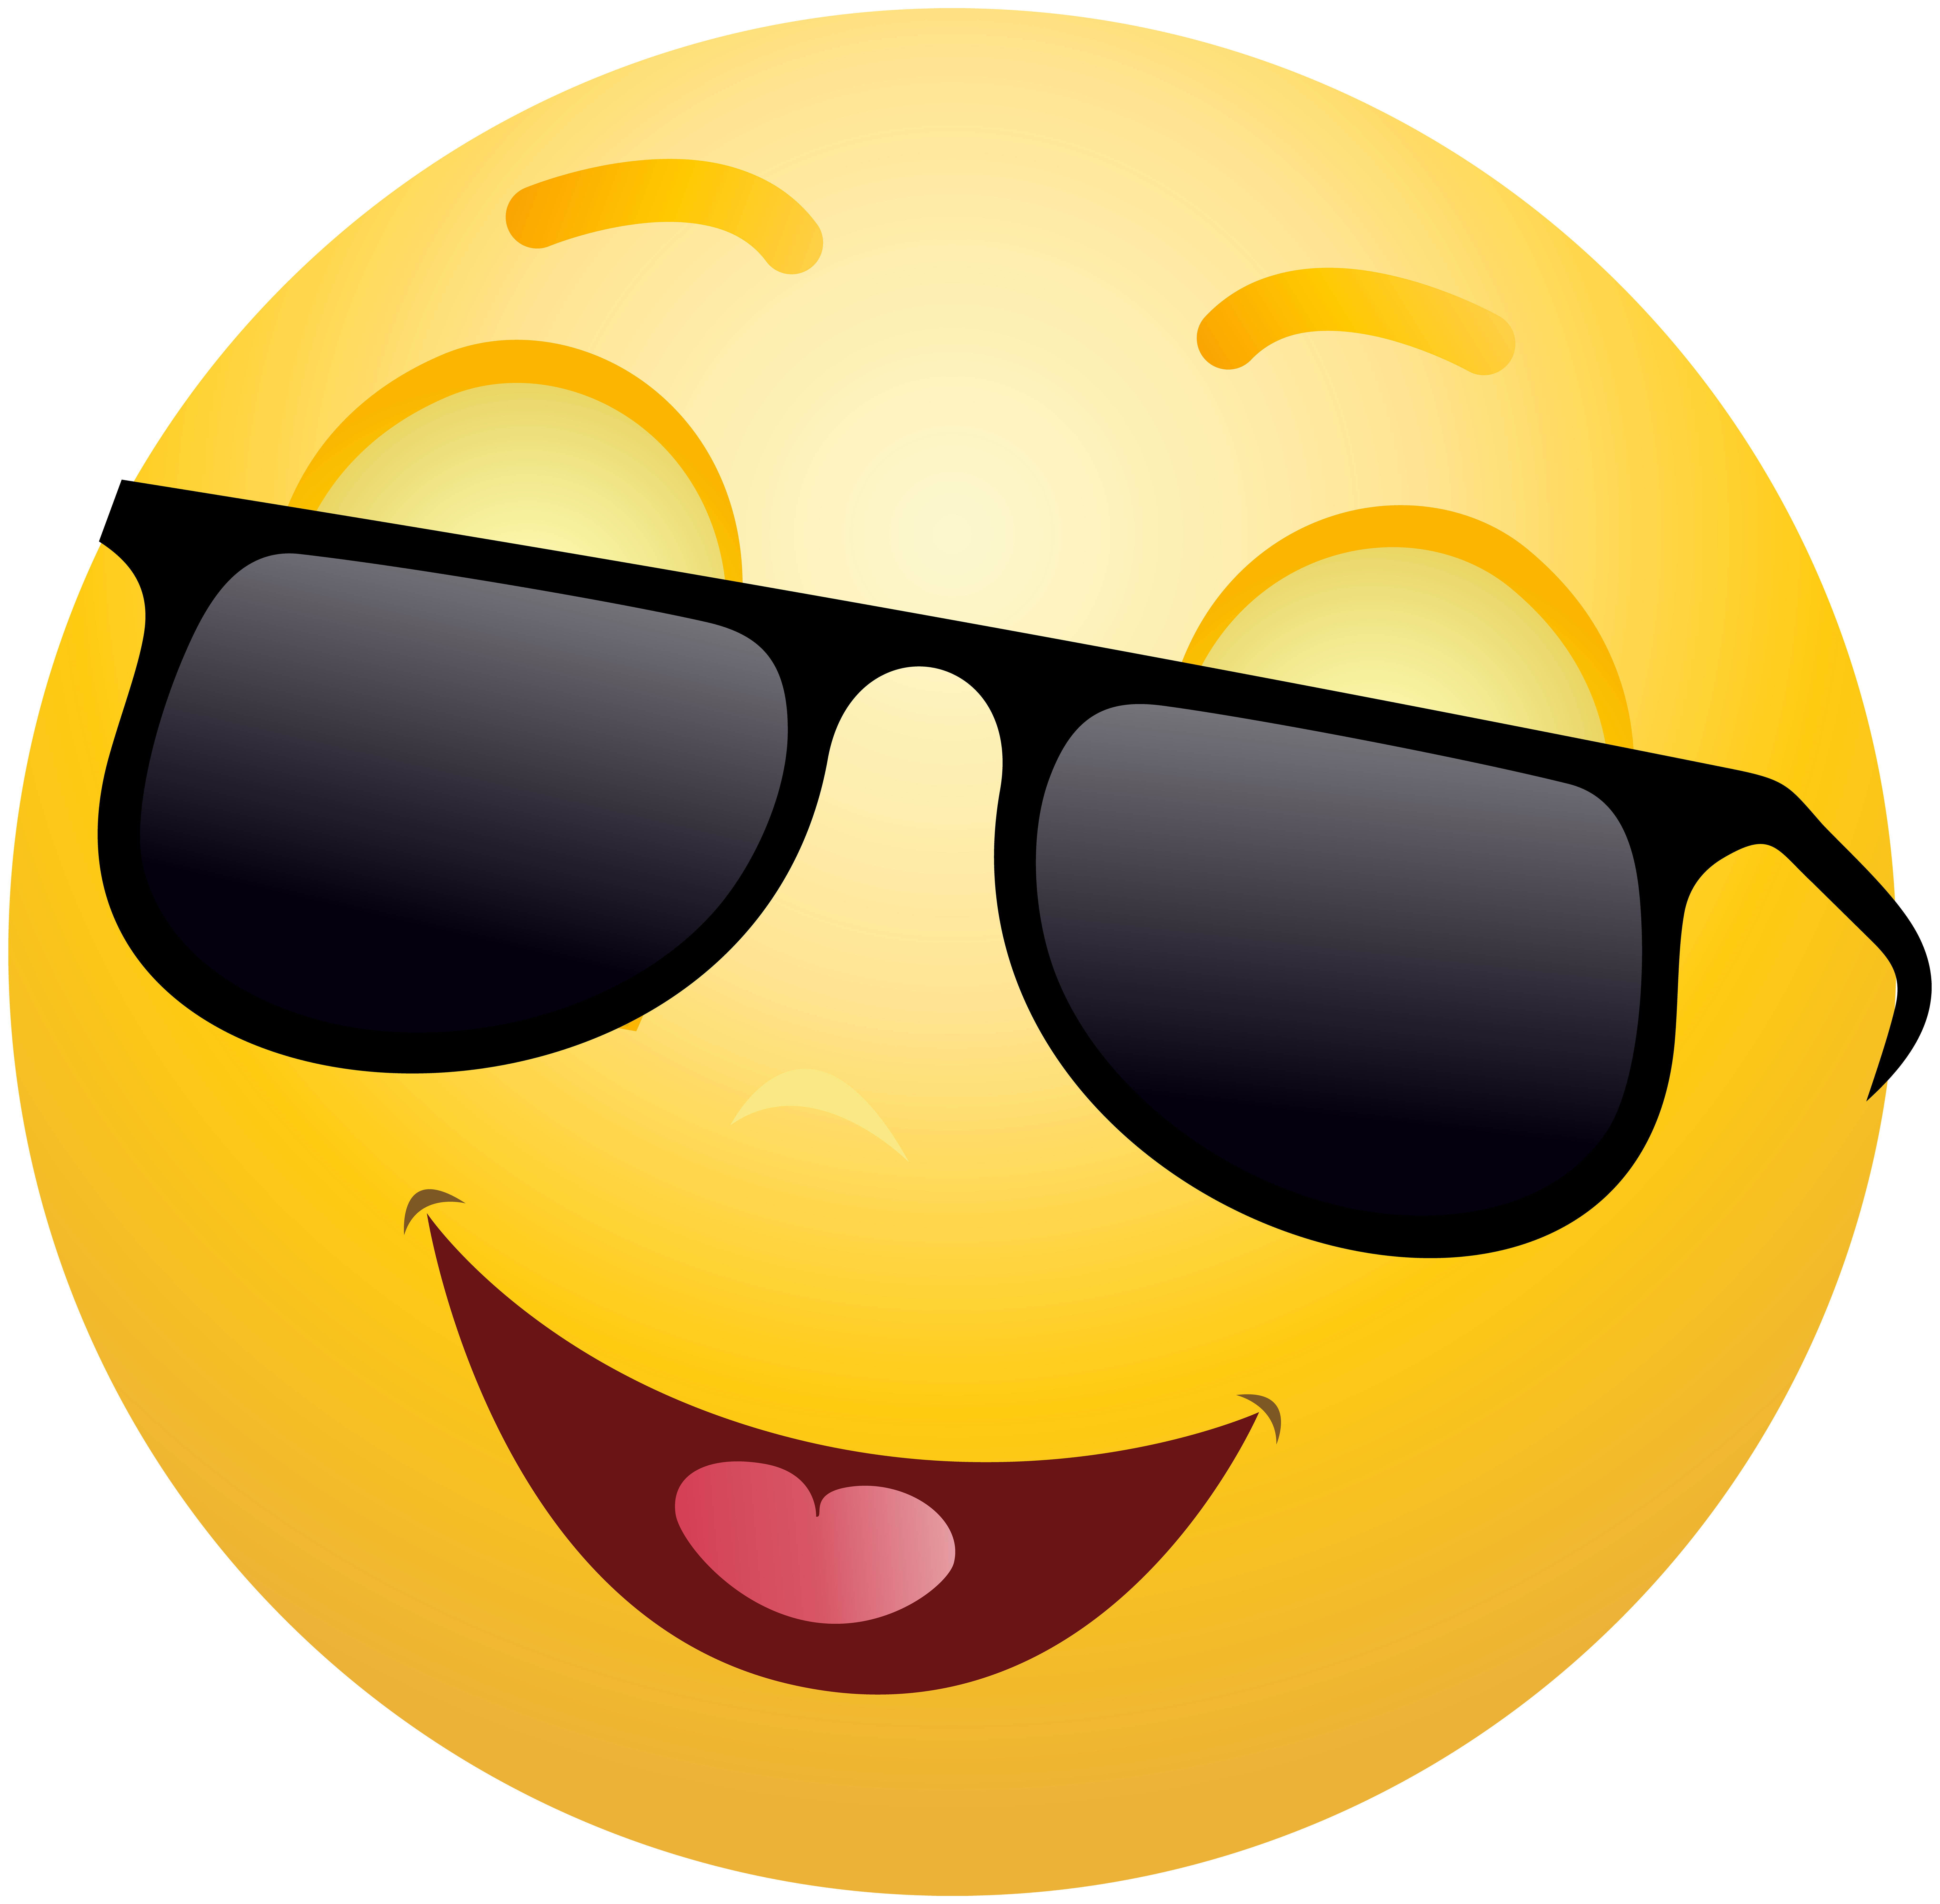 Smiling Emoticon with Sunglasses PNG Clip Art.